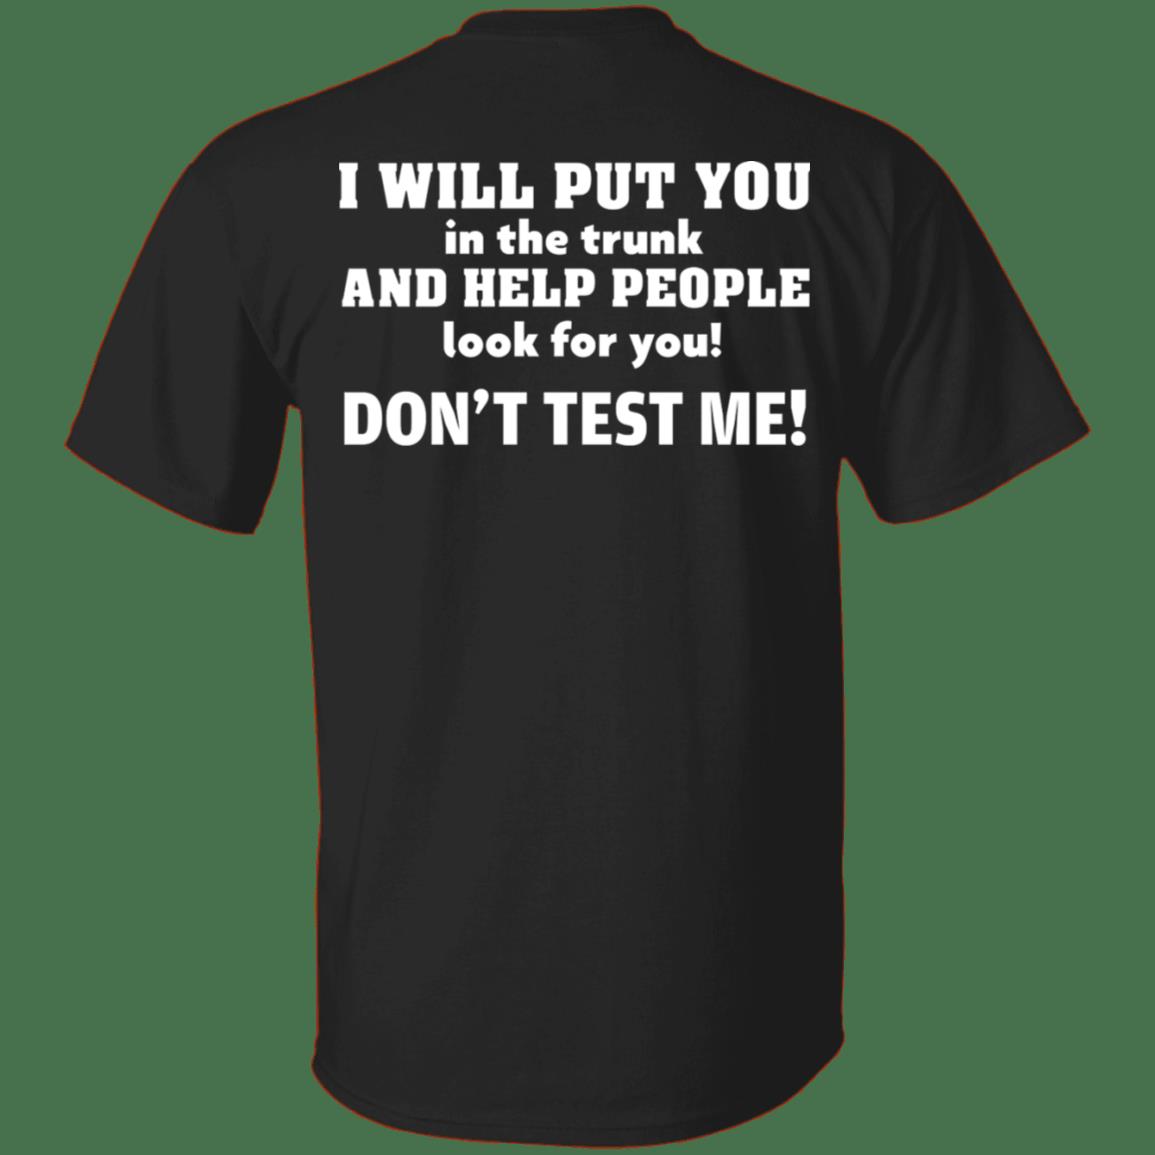 Veteran Shirt, Dad Shirt, I Will Put You In The Trunk And Help People, Don't Test Me T-Shirt KM1806